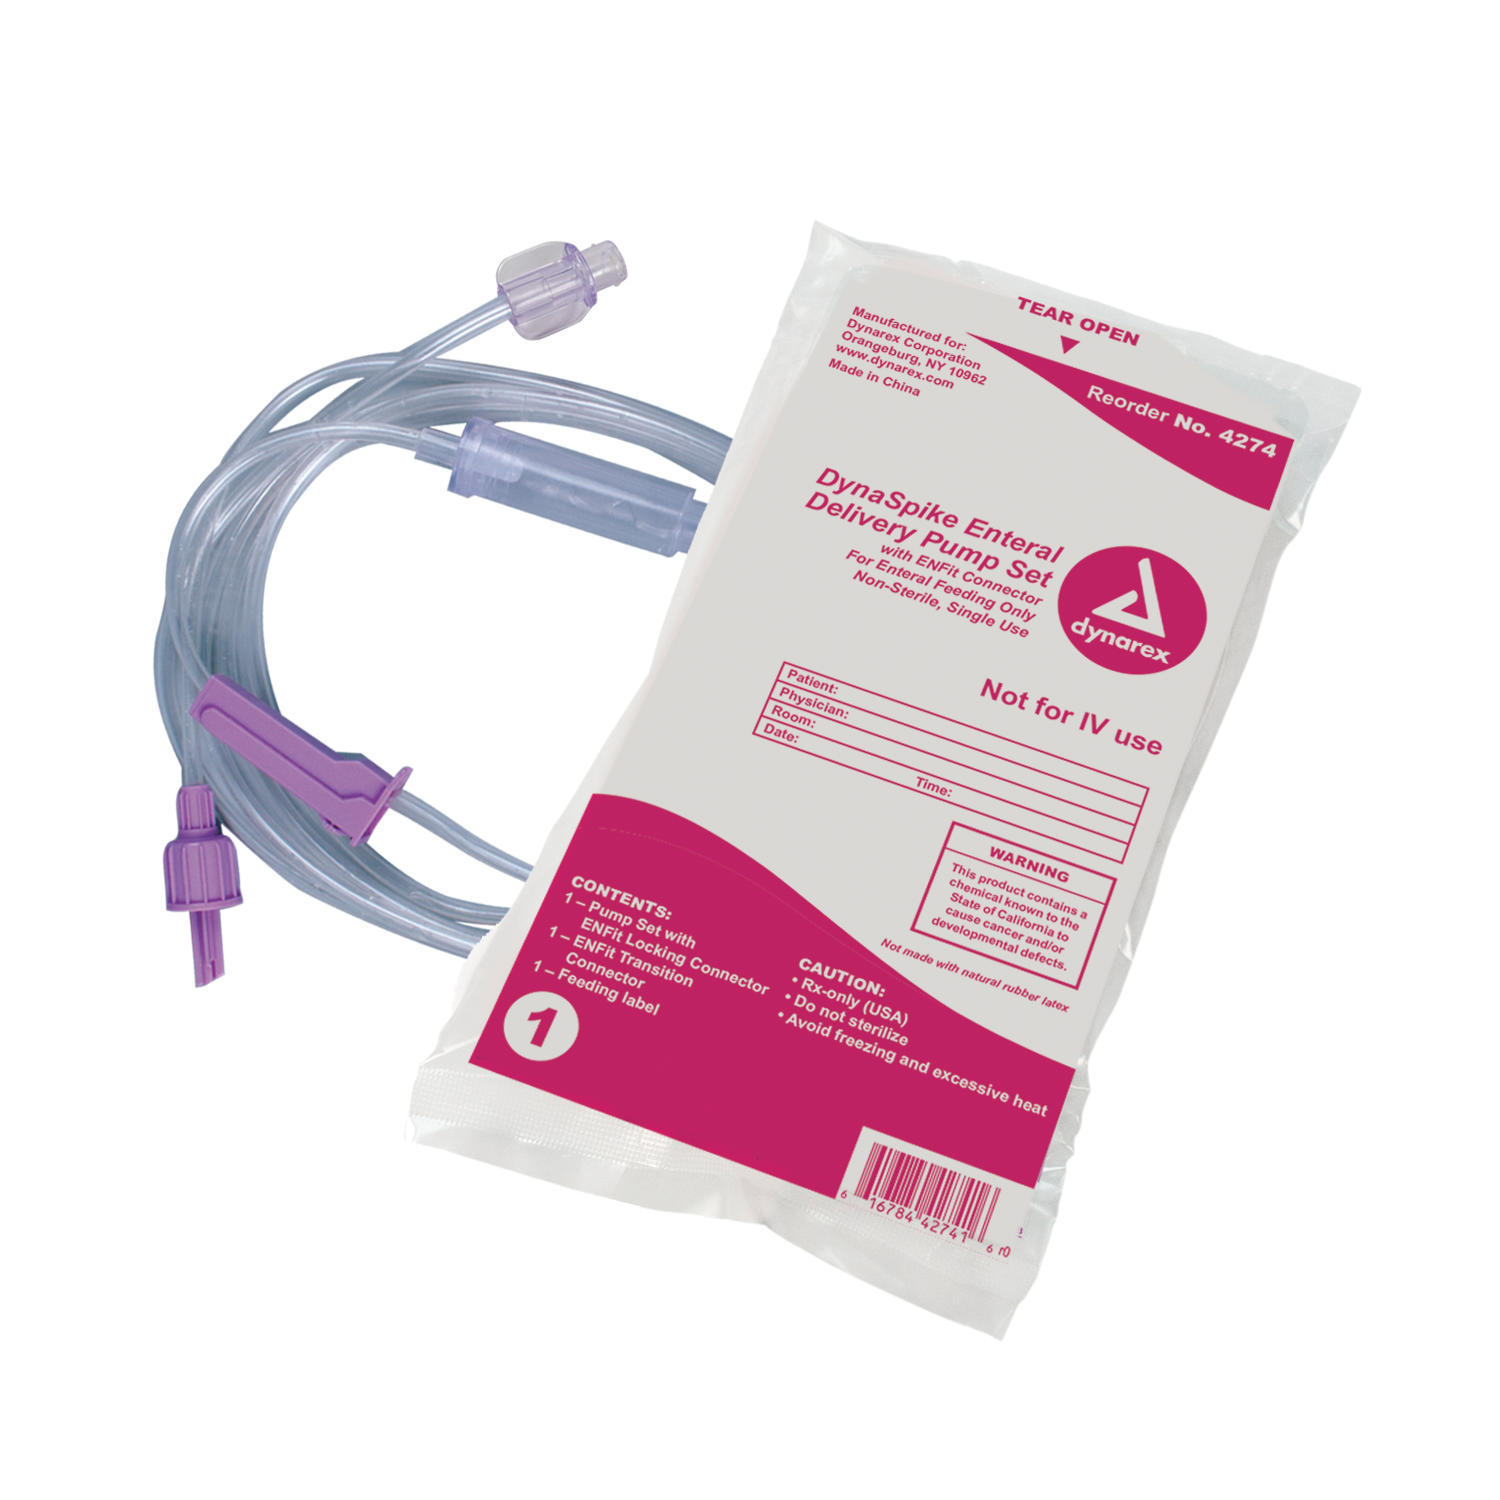 DynaSpike Enteral Delivery Pump Set with ENFit connector